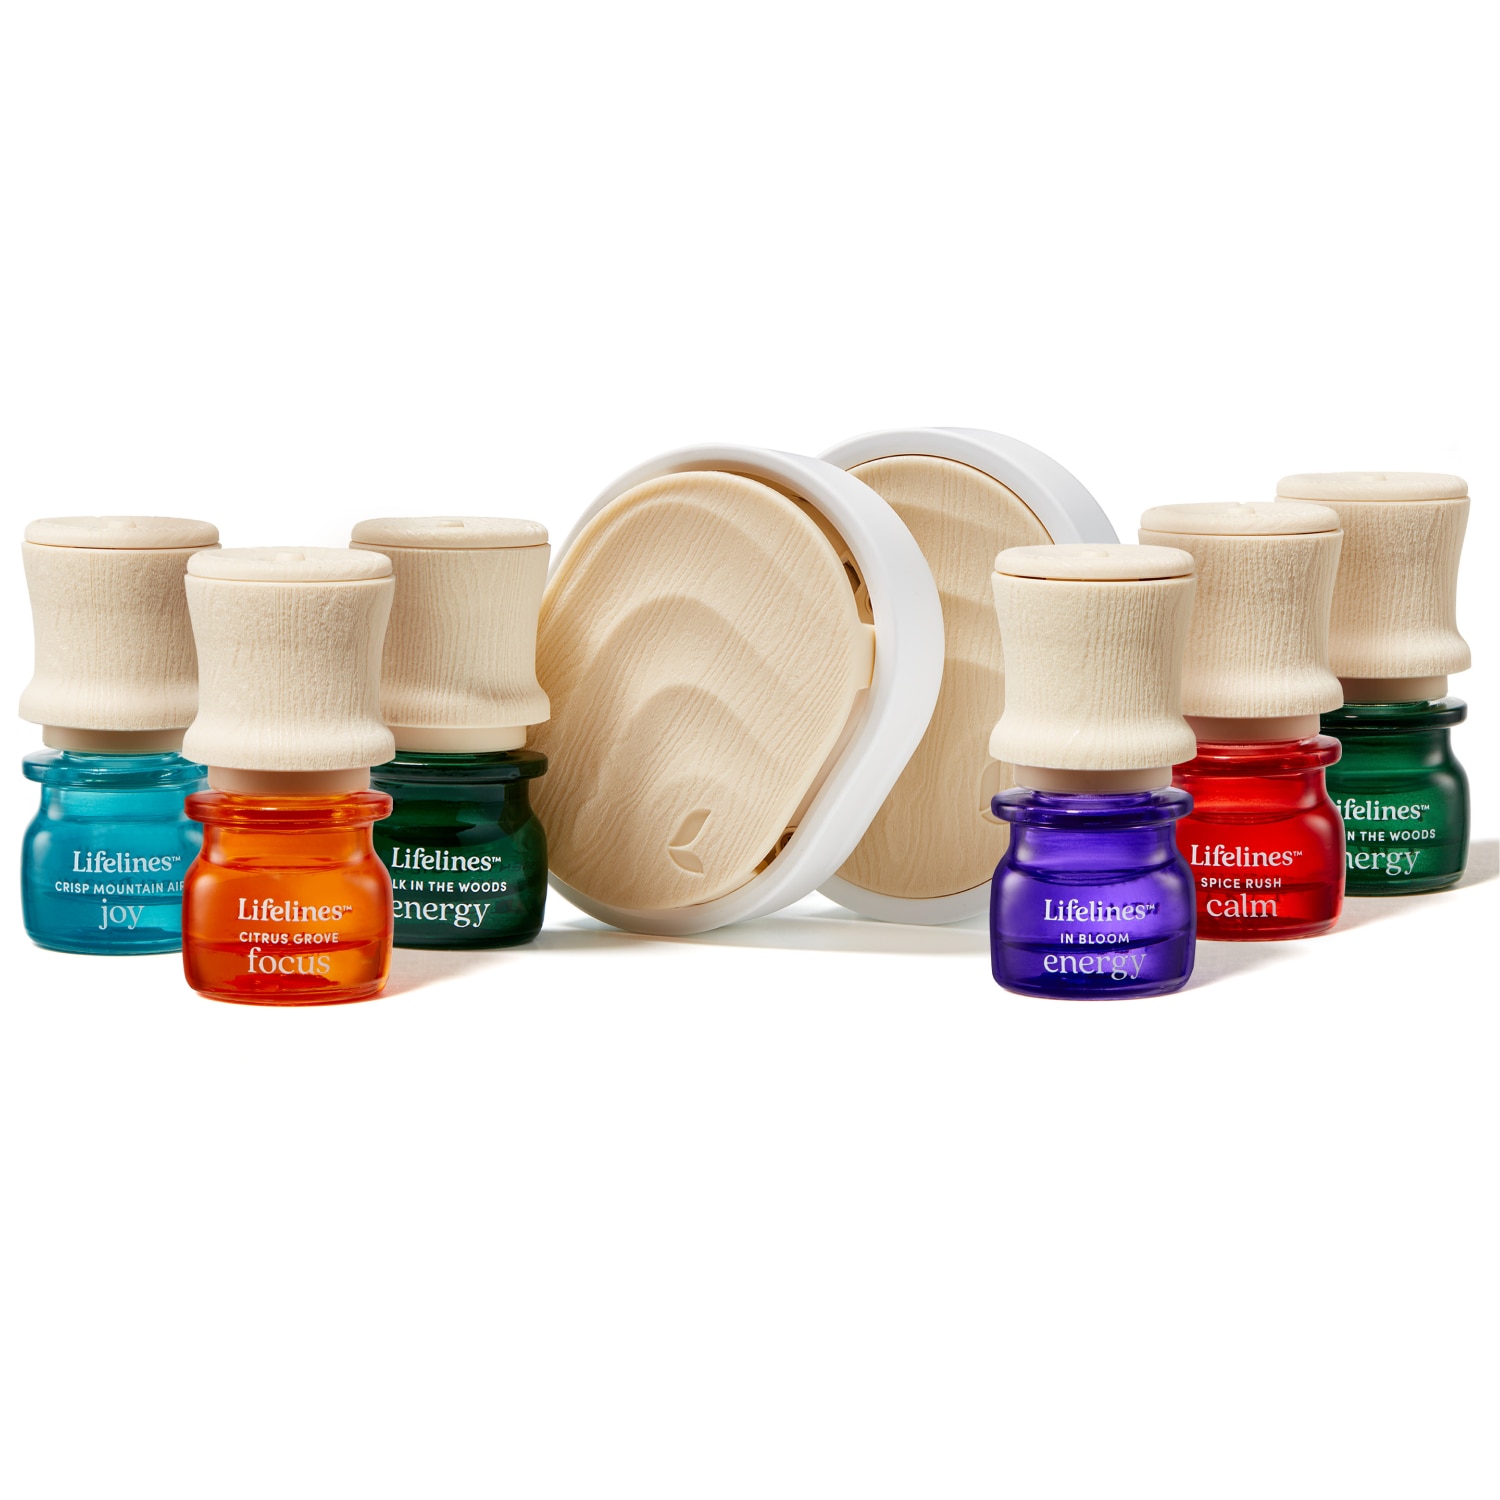 Lifelines "On-The-Go" Bundle - Everyday Diffuser and Essential Oil Blend Discovery Set